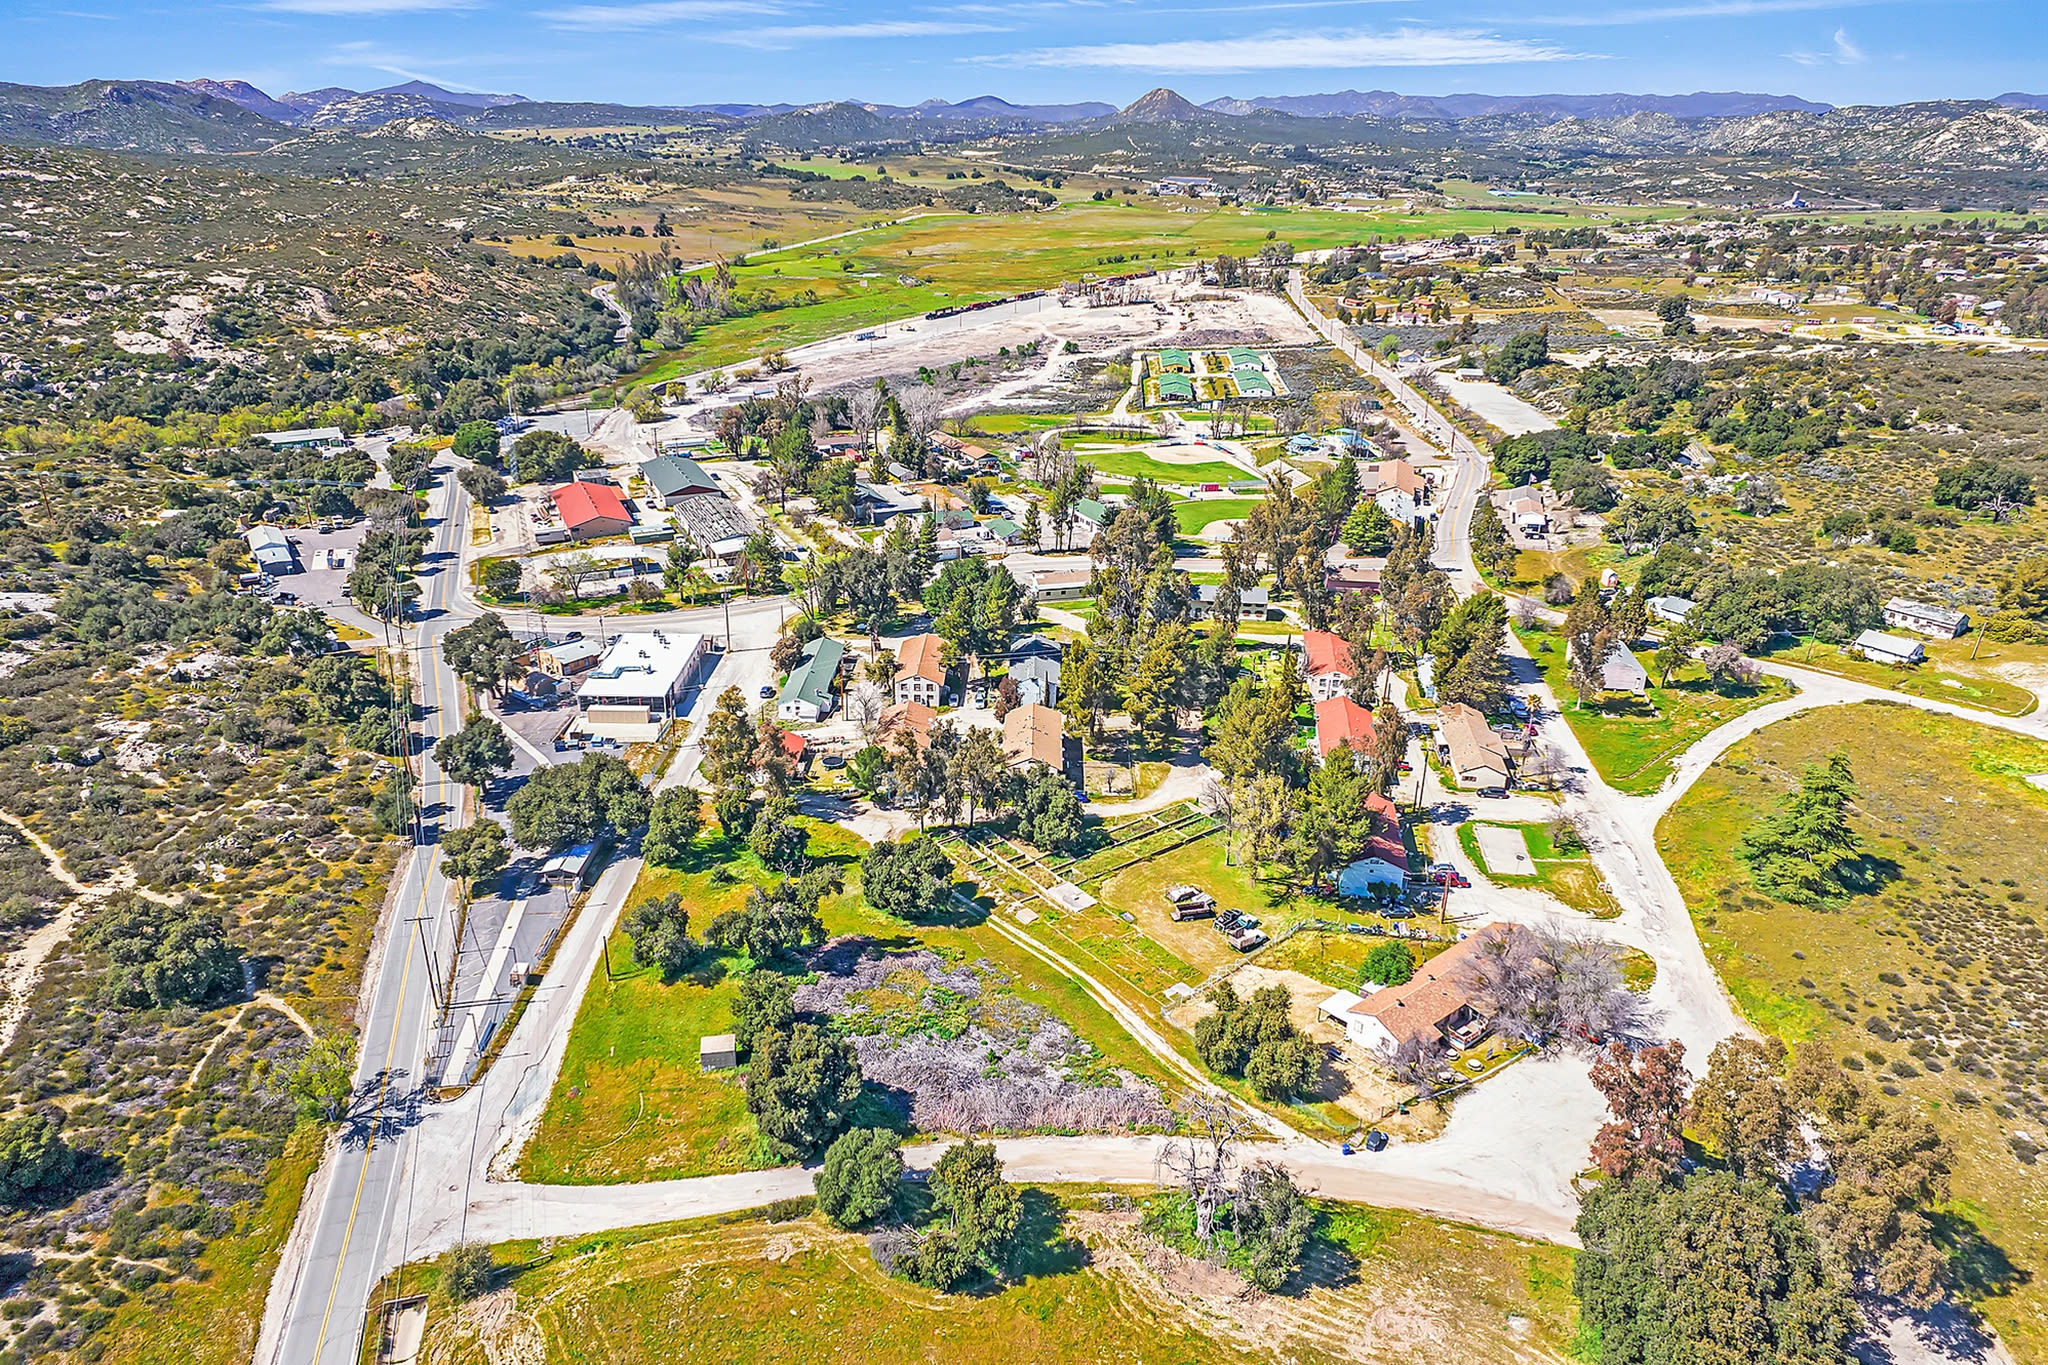 California town for sale for $6.6 million